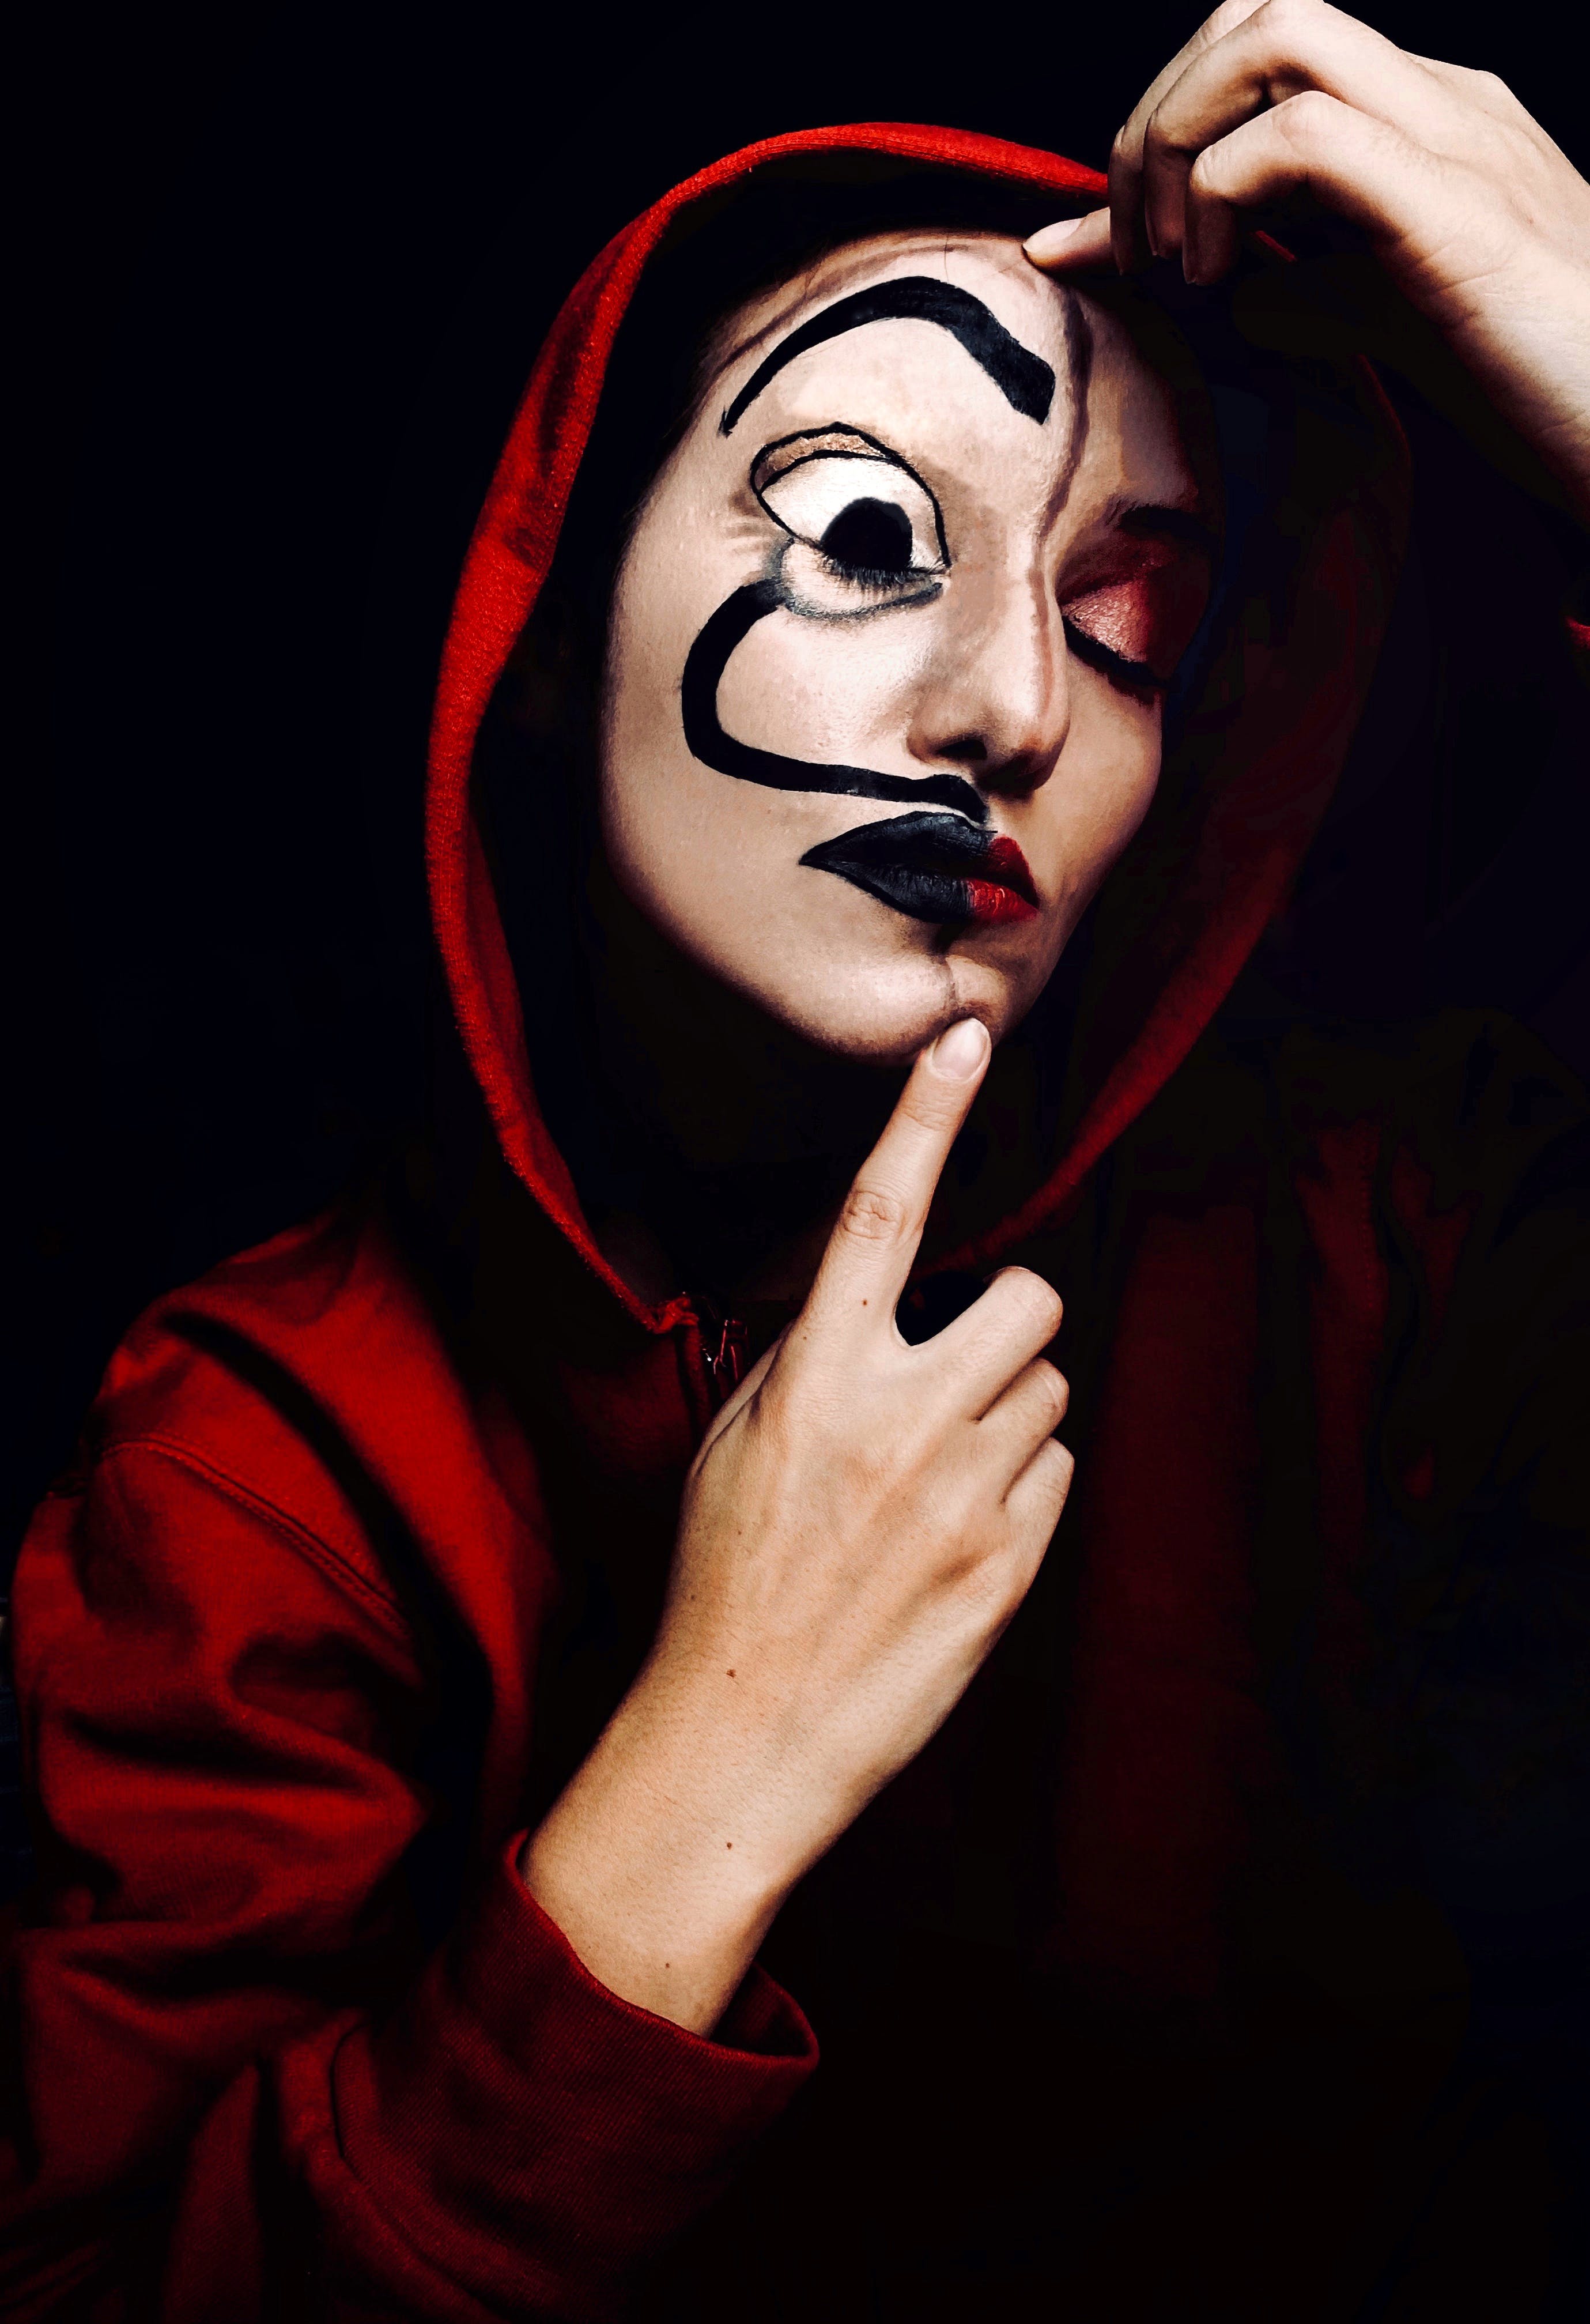 A person wearing a "Money Heist," mask. | Source: Pexels